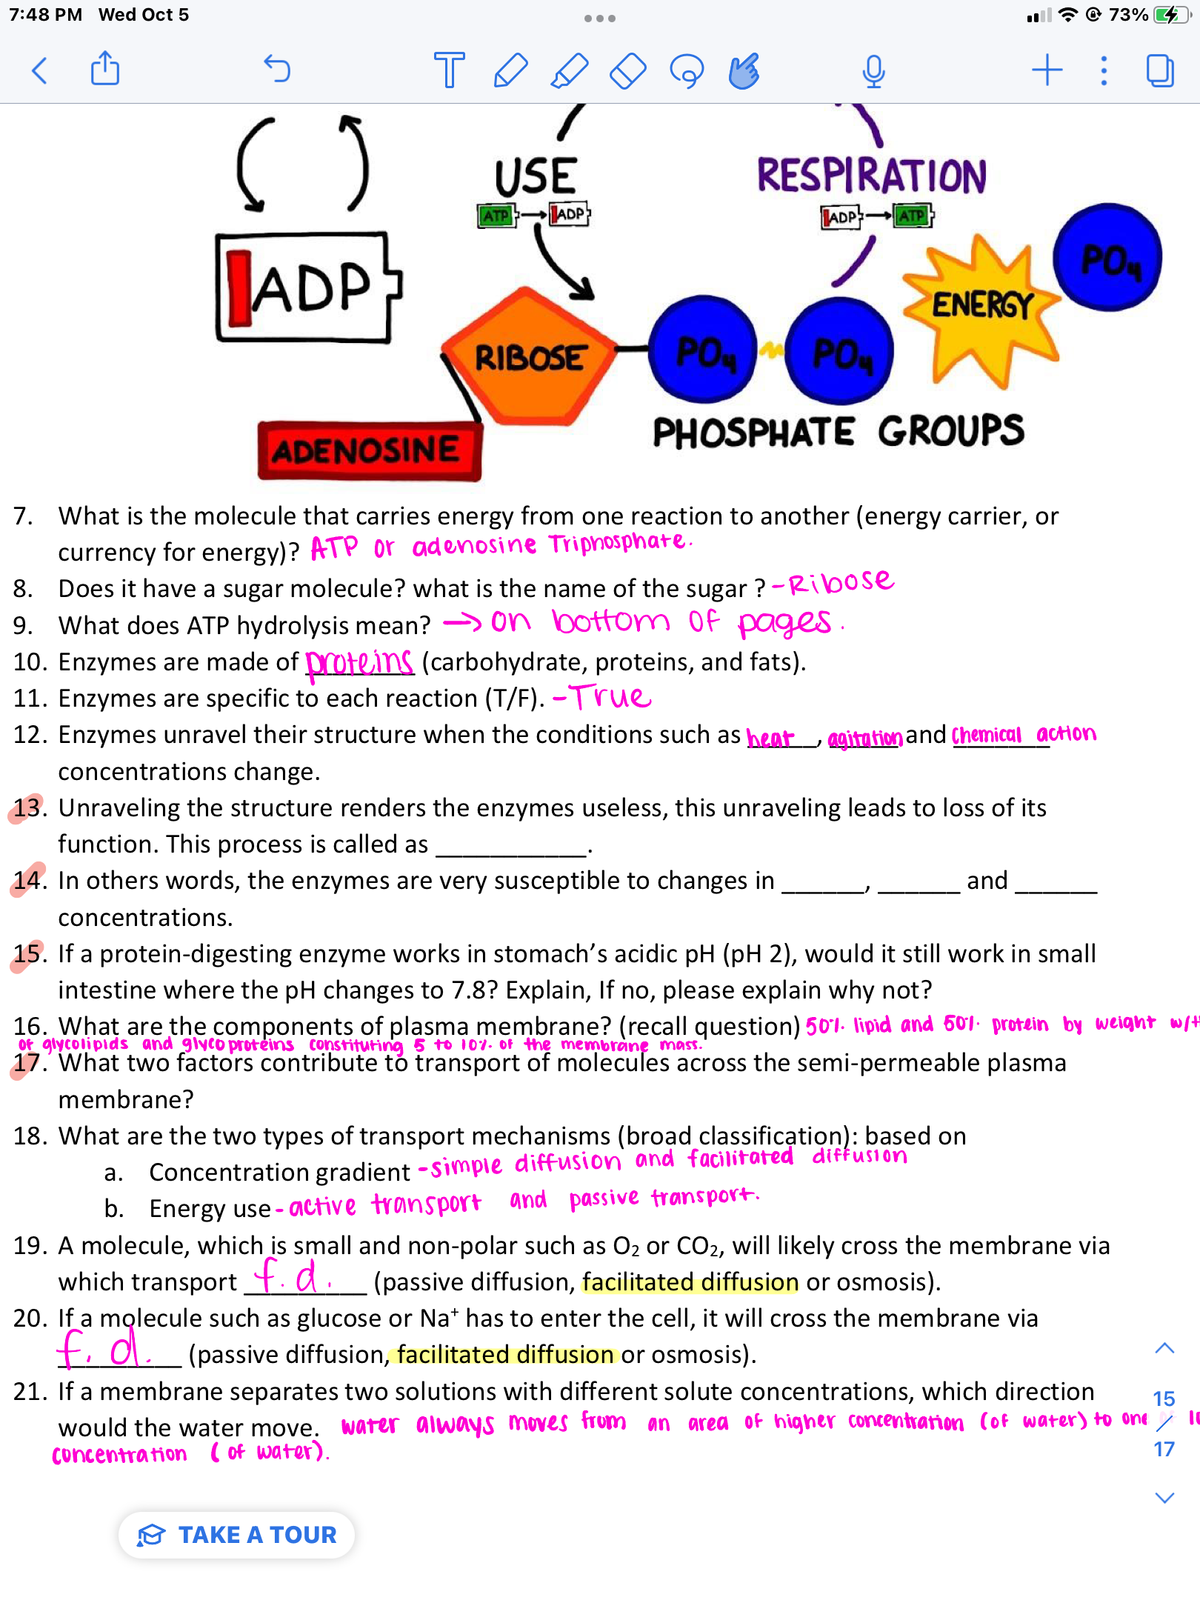 7:48 PM Wed Oct 5
5
( J
ADP
T◊
USE
ADP
ATP
●●●
RIBOSE
TAKE A TOUR
RESPIRATION
ADP-
| ATPI
PO PO
ENERGY
PHOSPHATE GROUPS
ADENOSINE
7. What is the molecule that carries energy from one reaction to another (energy carrier, or
currency for energy)? ATP or adenosine Triphosphate.
+ :
8.
Does it have a sugar molecule? what is the name of the sugar ? - Ribose
9. What does ATP hydrolysis mean? → on bottom of pages.
10. Enzymes are made of proteins (carbohydrate, proteins, and fats).
11. Enzymes are specific to each reaction (T/F). -True
12. Enzymes unravel their structure when the conditions such as heat, agitation and Chemical action
concentrations change.
13. Unraveling the structure renders the enzymes useless, this unraveling leads to loss of its
function. This process is called as
14. In others words, the enzymes are very susceptible to changes in
concentrations.
and
73%
PO4
If a protein-digesting enzyme works in stomach's acidic pH (pH 2), would it still work in small
intestine where the pH changes to 7.8? Explain, If no, please explain why not?
16. What are the components of plasma membrane? (recall question) 50%. lipid and 50% protein by weight w/t
of glycolipids and glycoproteins constituting 5 to 10% of the membrane mass.
17. What two factors contribute to transport of molecules across the semi-permeable plasma
membrane?
18. What are the two types of transport mechanisms (broad classification): based on
Concentration gradient -simple diffusion and facilitated diffusion
a.
b. Energy use-active transport and passive transport.
19. A molecule, which is small and non-polar such as O₂ or CO₂, will likely cross the membrane via
which transport f.d. (passive diffusion, facilitated diffusion or osmosis).
20. If a molecule such as glucose or Na* has to enter the cell, it will cross the membrane via
(passive diffusion, facilitated diffusion or osmosis).
f.d.
15
21. If a membrane separates two solutions with different solute concentrations, which direction
would the water move. water always moves from an area of higher concentration (of water) to one / 15
Concentration (of water).
17